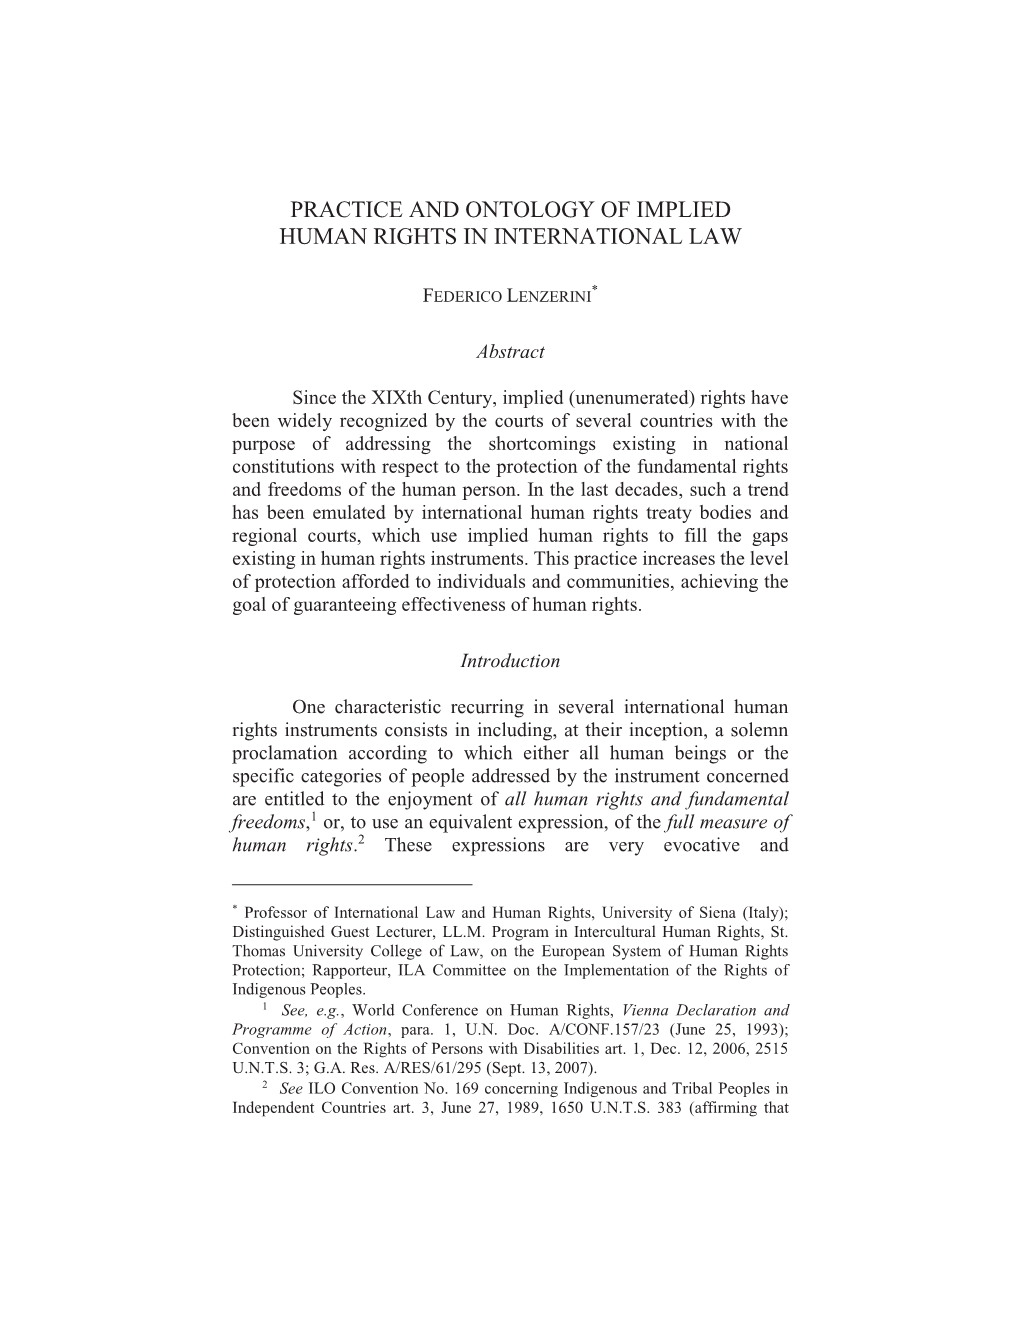 Practice and Ontology of Implied Human Rights in International Law